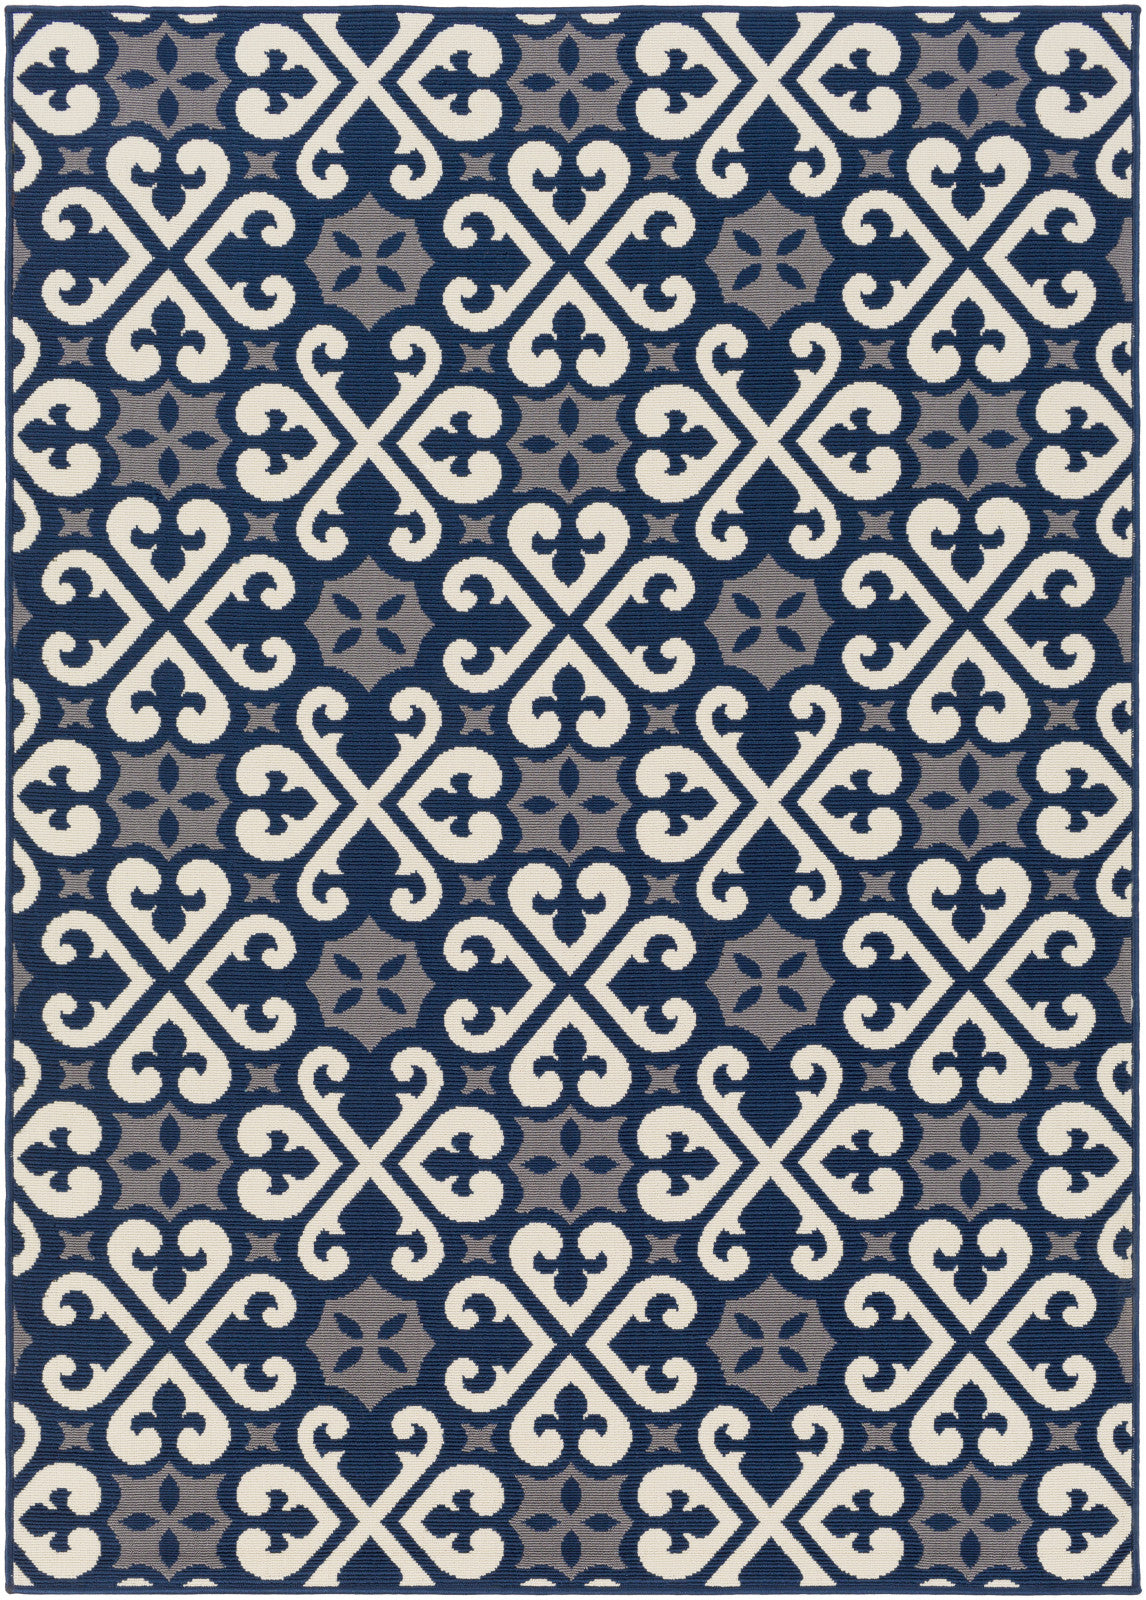 Artistic Weavers Myrtle Scarborough Navy Blue/Gray Area Rug main image